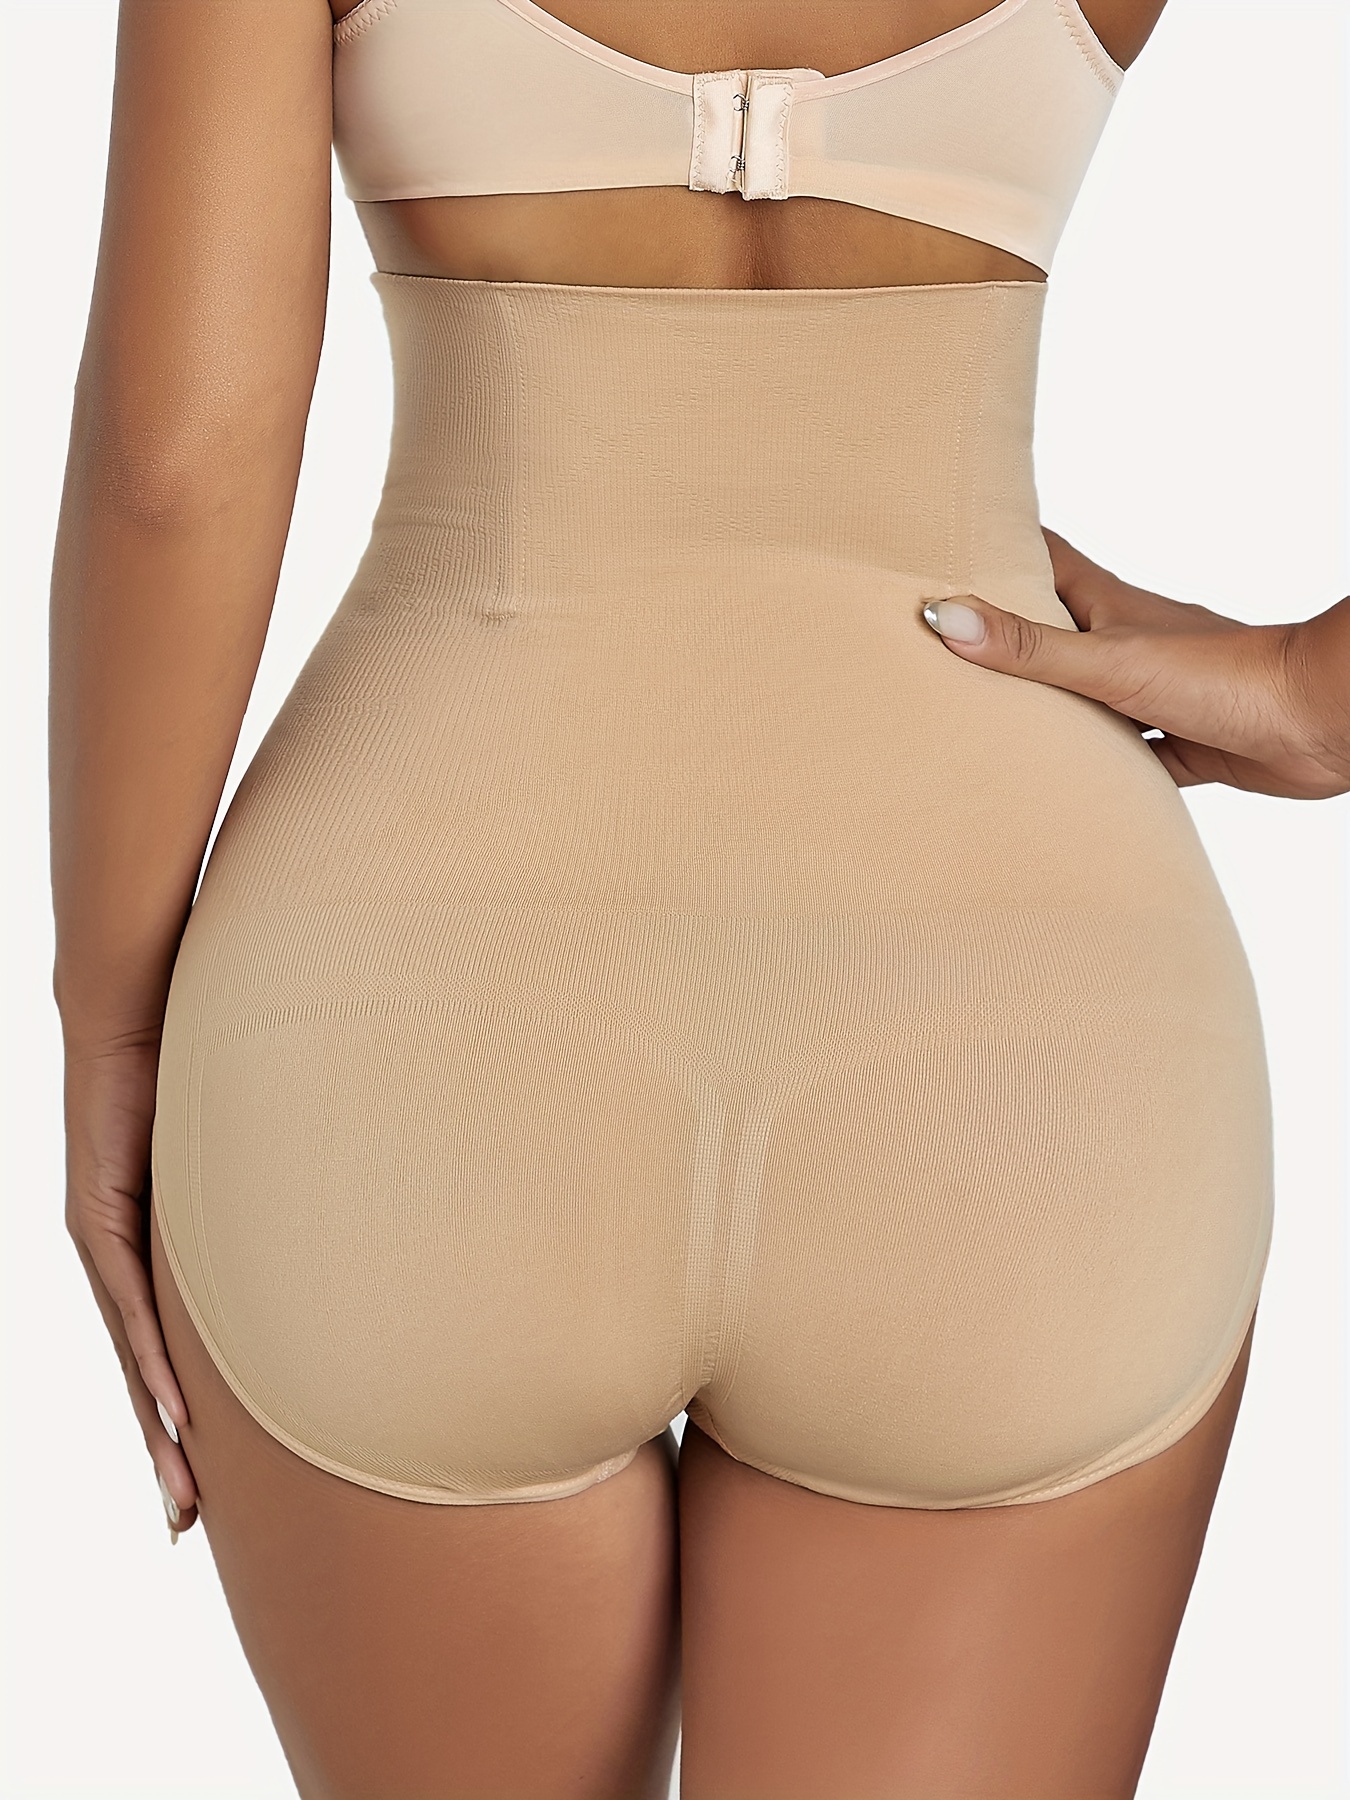 Women's Cotton Spandex High Waist Panty/Tummy Control Panty (Pack of 2)  Pink/Beige